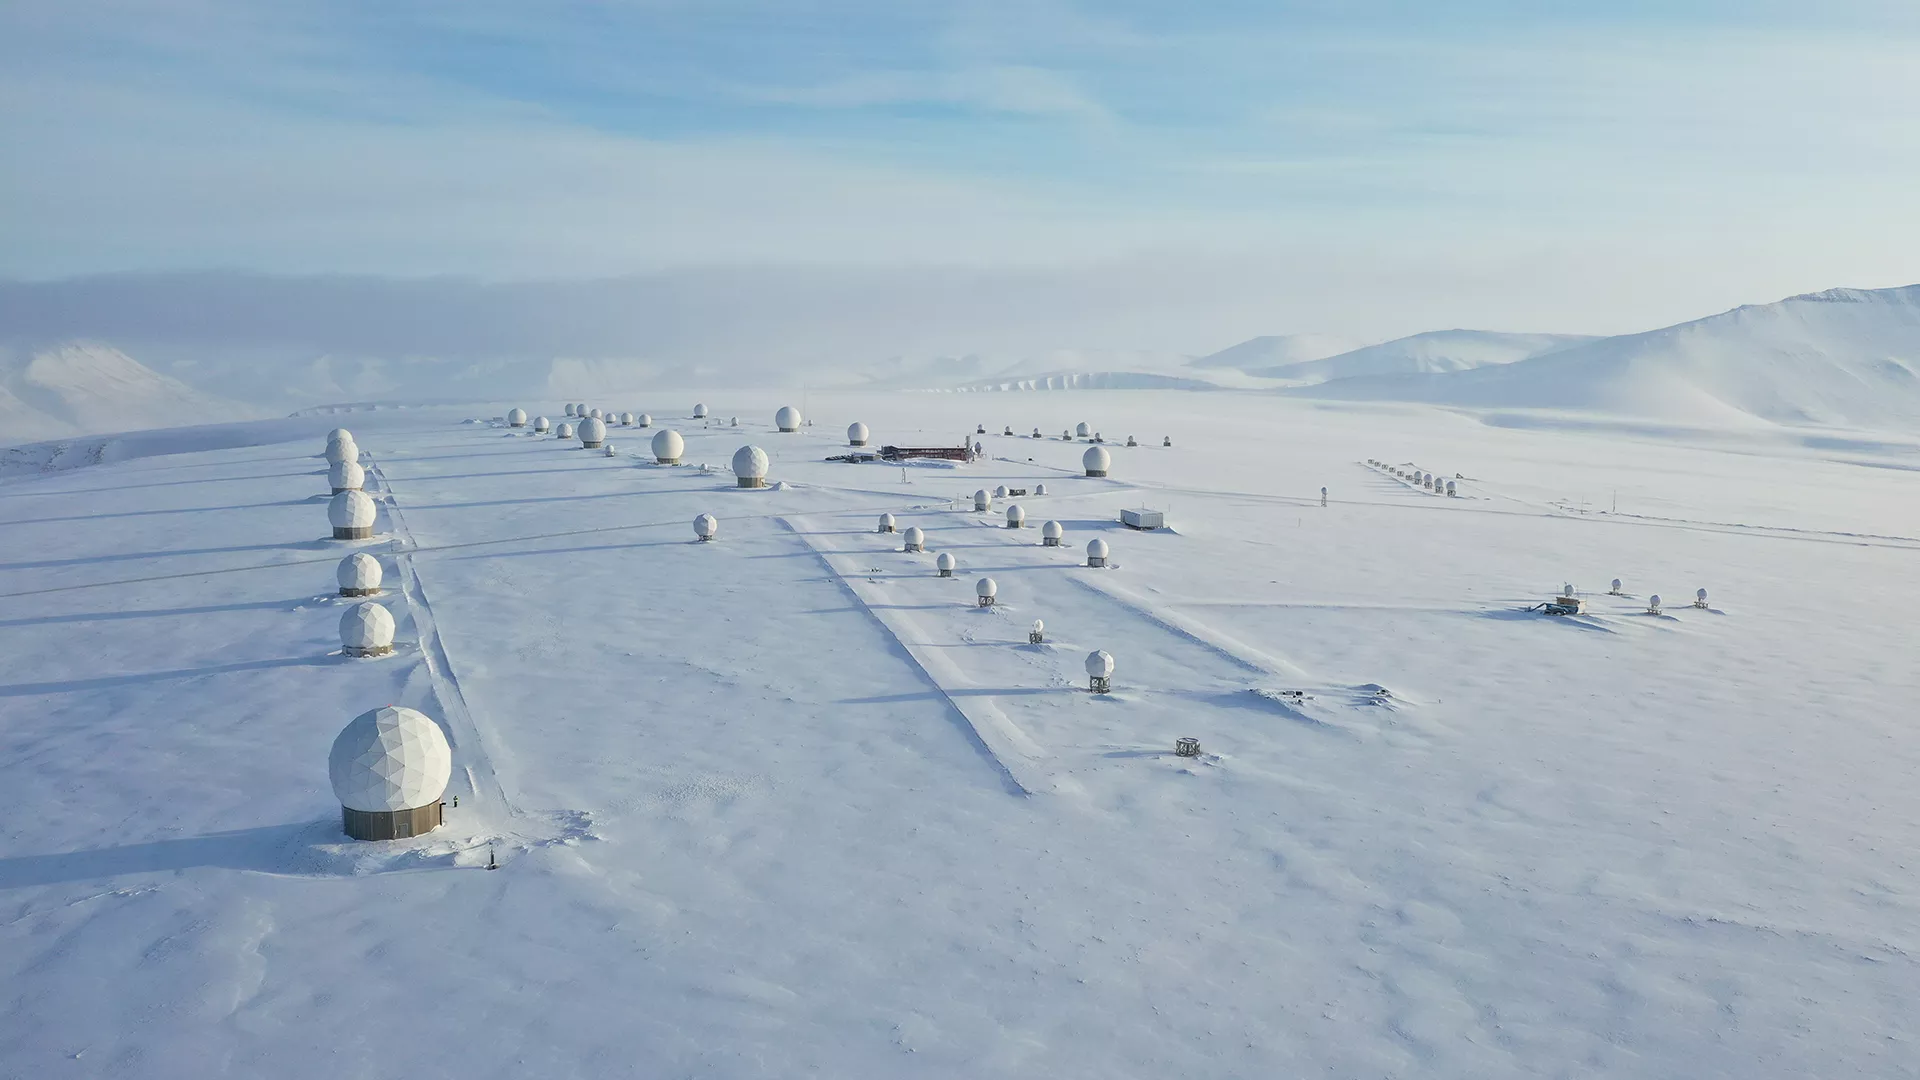 Image of satellite receivers in the north pole